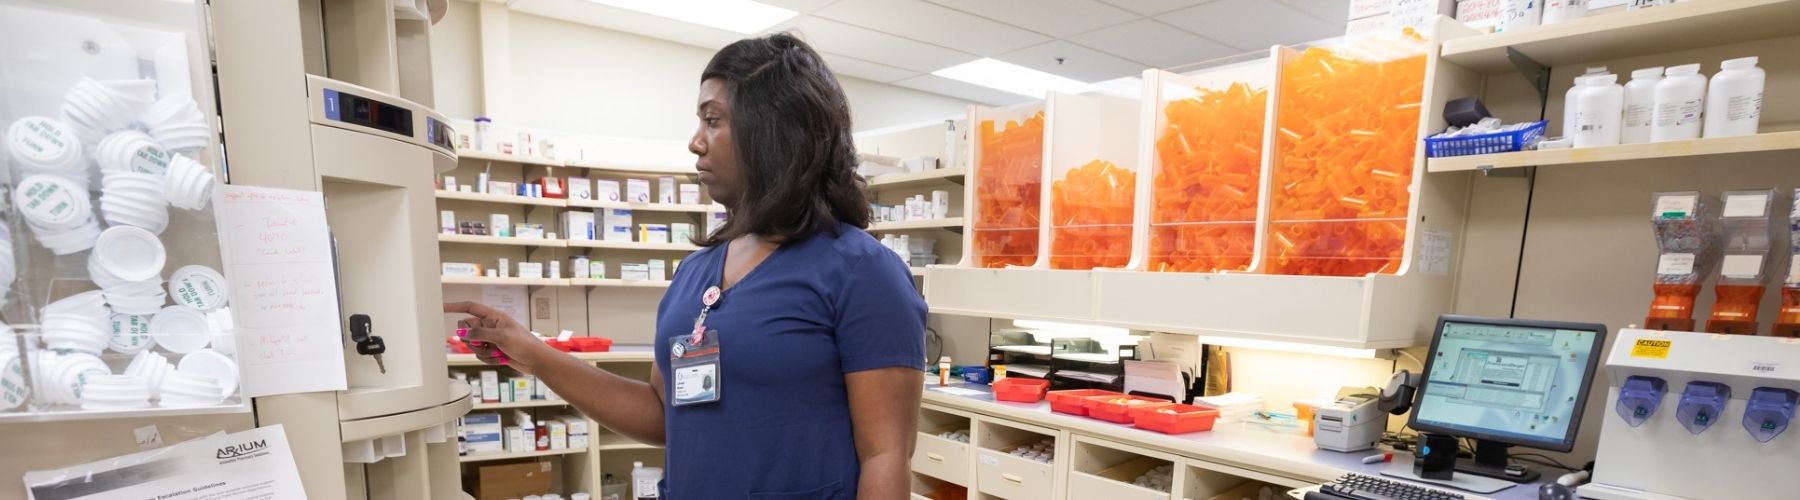 A pharmacy worker stands in the pharmacy work room performing job tasks.